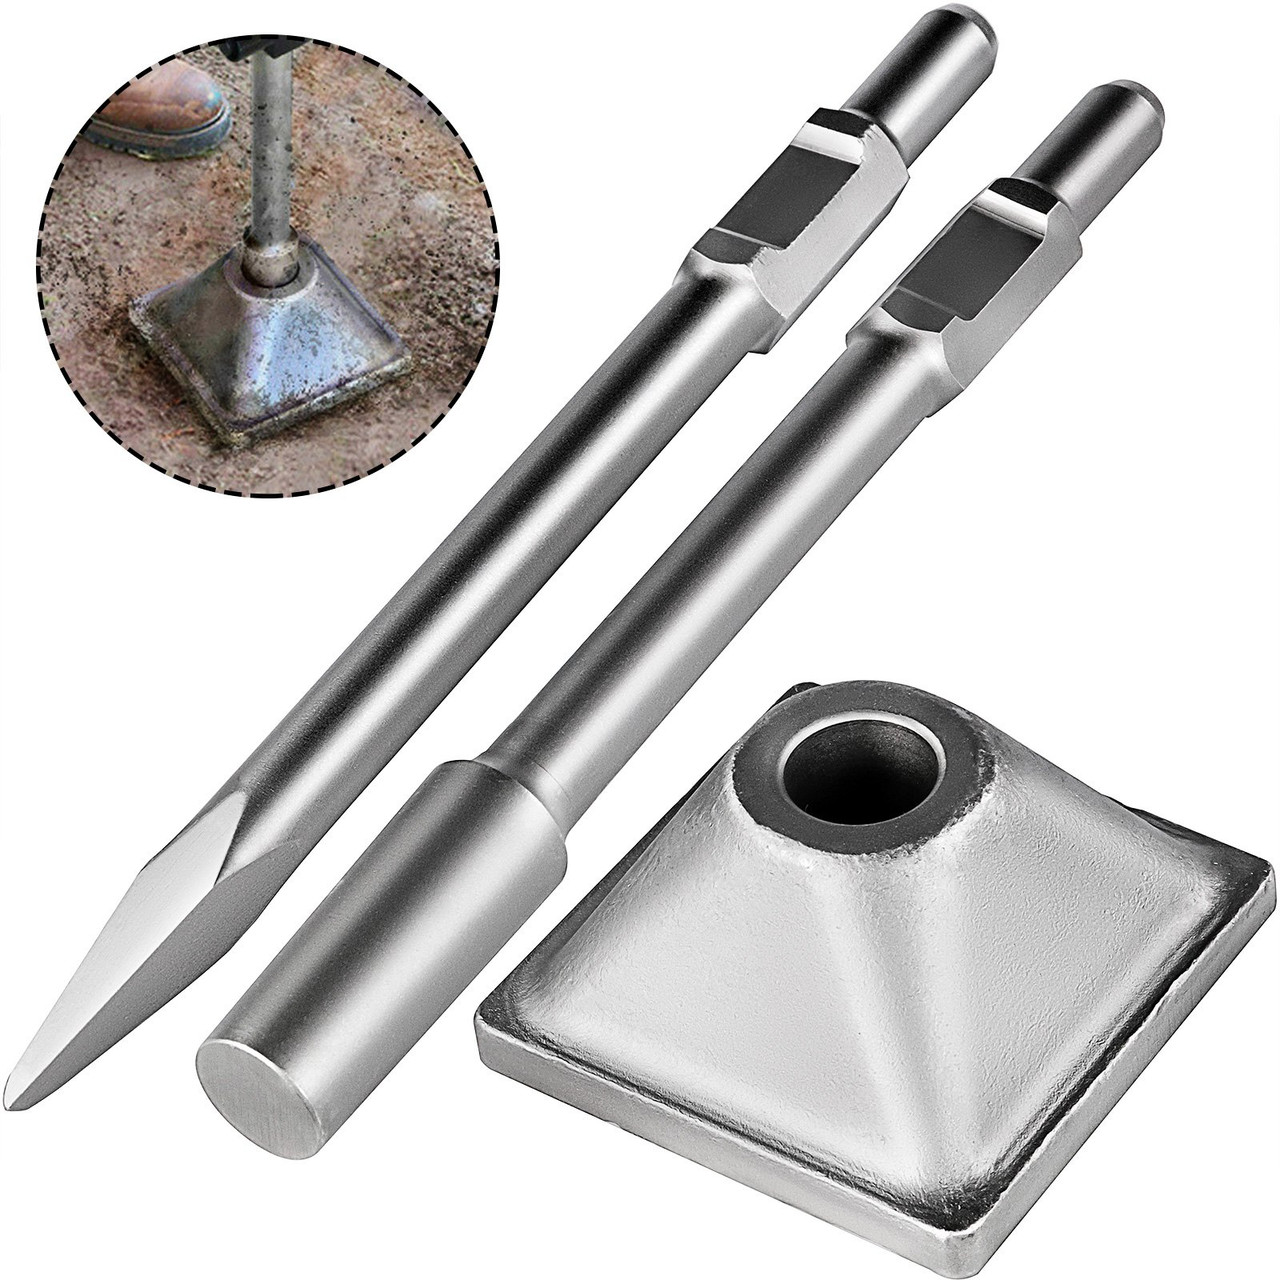 6x6? Compactor Plate 1-1/8 inch Jack Hammer with Electric Chisel Dirt  Compactor, Tamper Shank